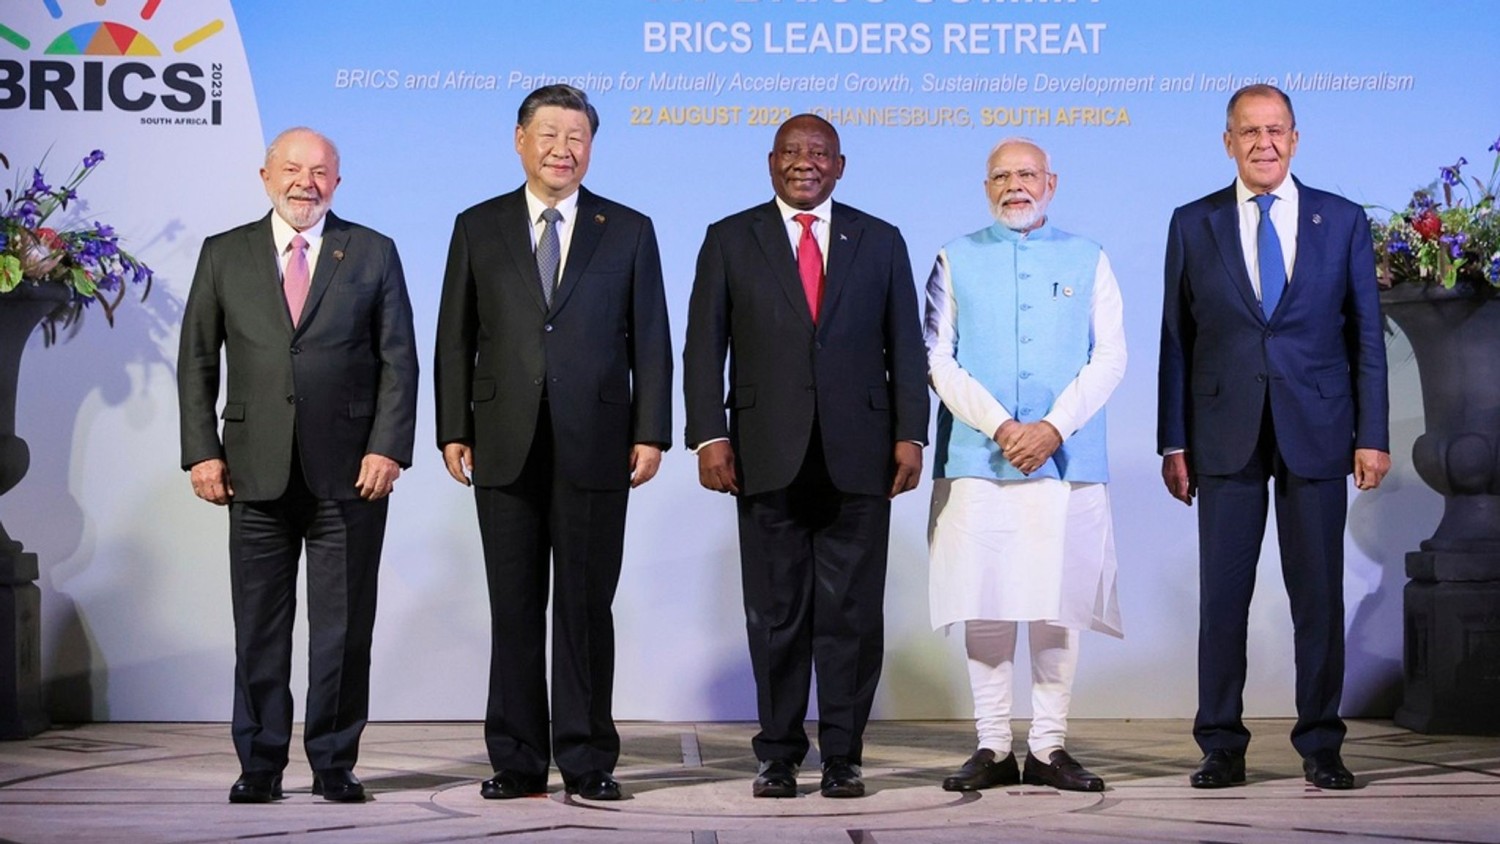 China’s Xi unexpectedly skipped a key BRICS event. No one is saying why